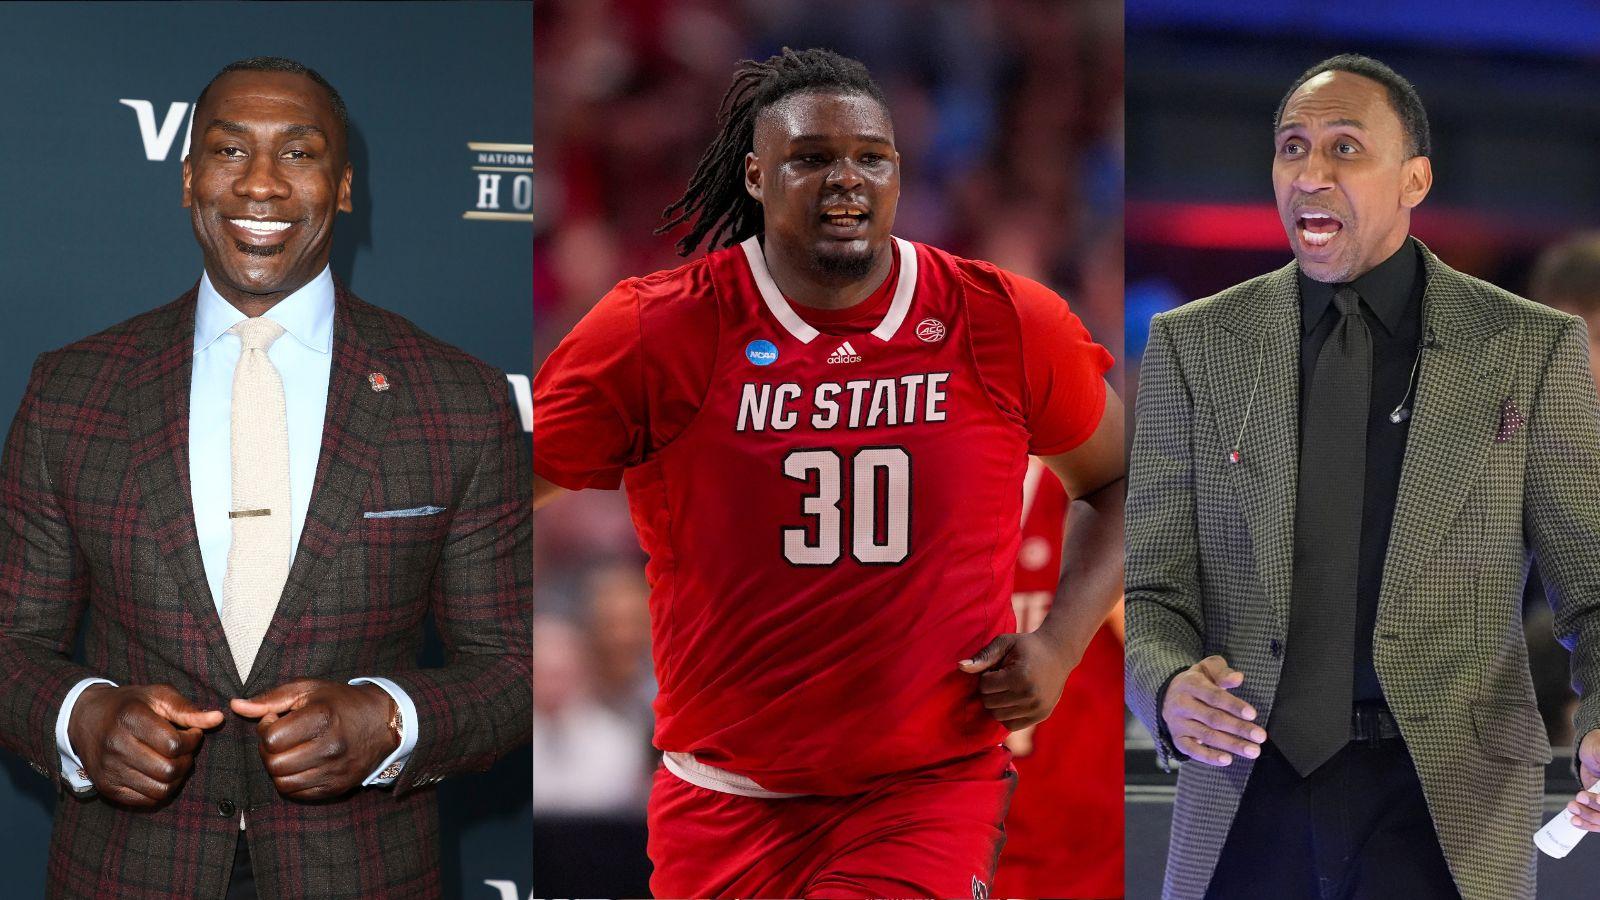 Shannon Sharpe (left) and DJ Burns Jr. as a member of the NC State Wolfpack (center) and Stephen A. Smith (right).